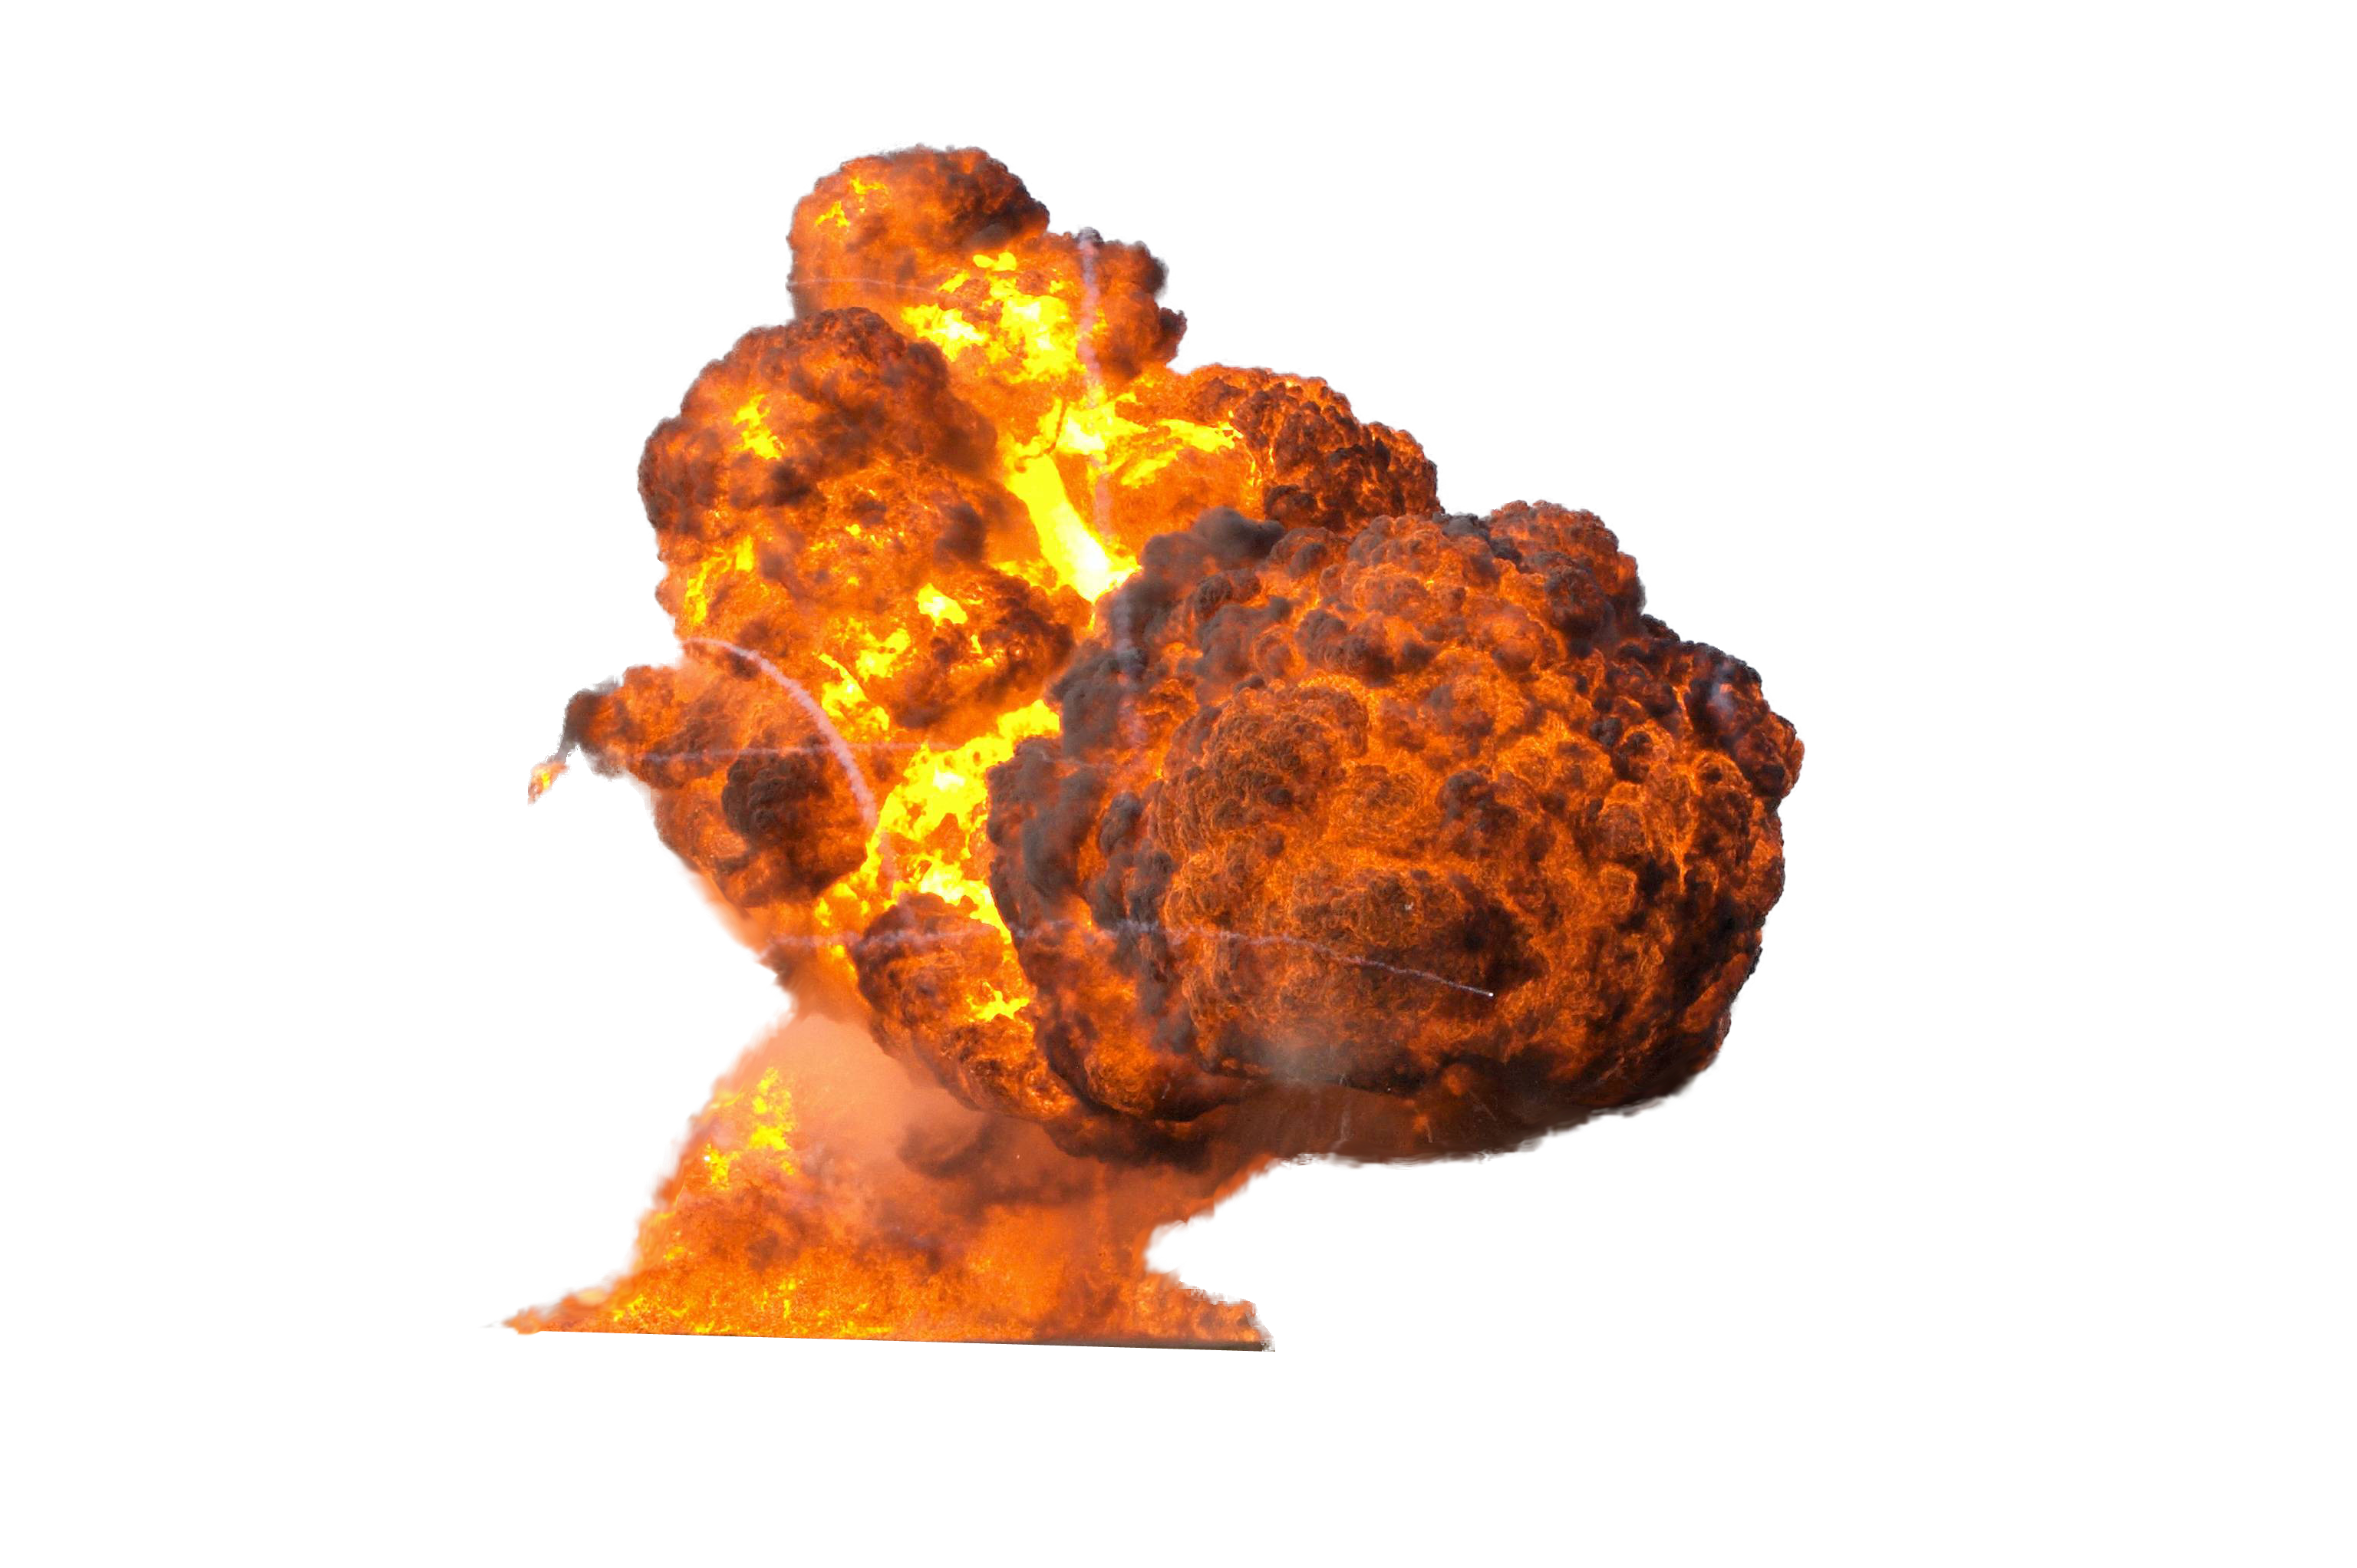 Big with fire and. Explosion smoke png